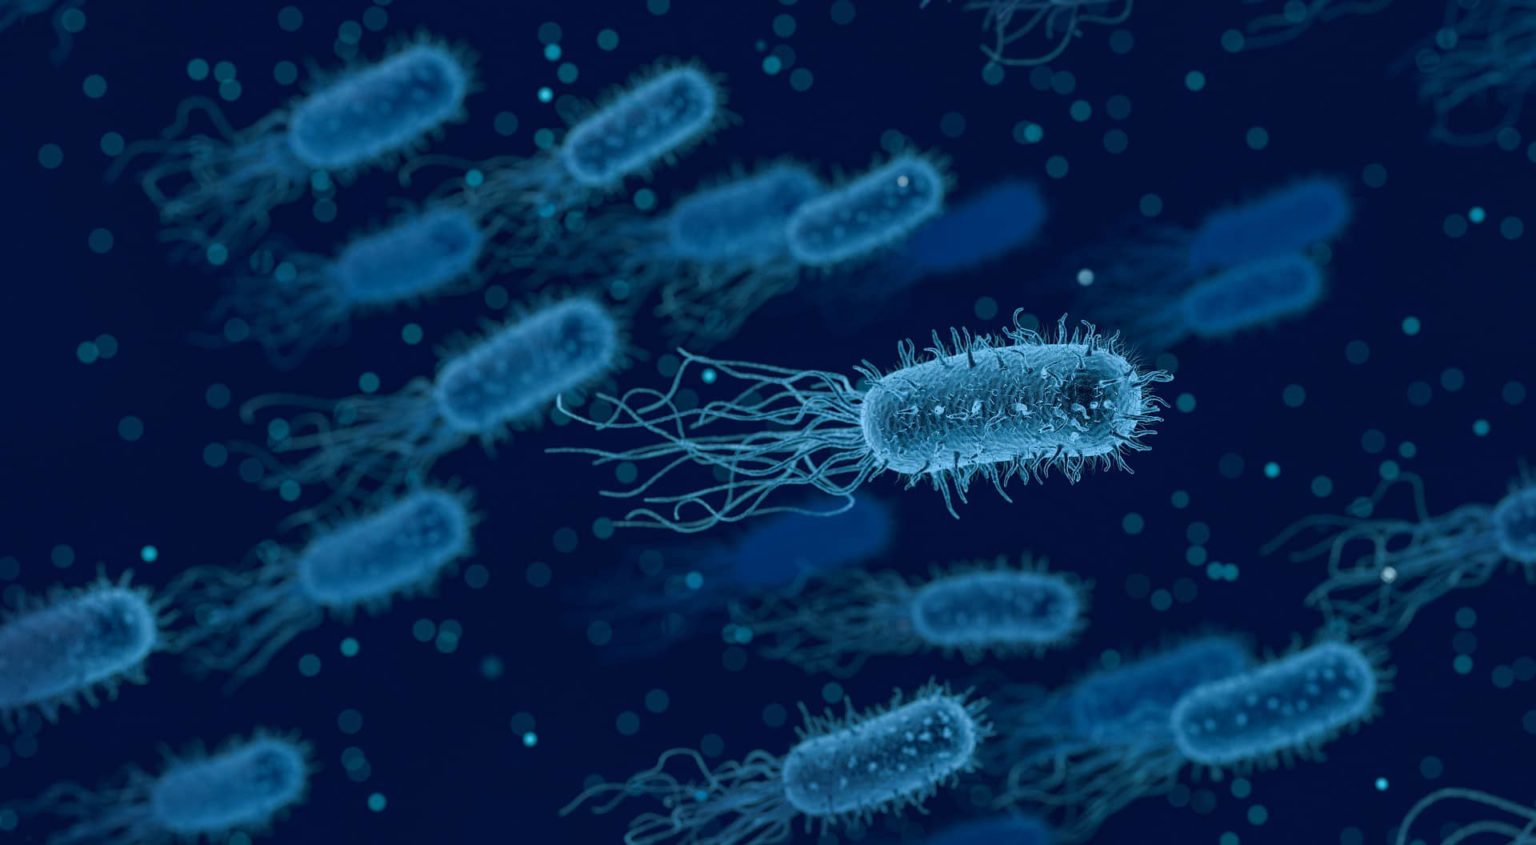 Microorganisms - An introduction